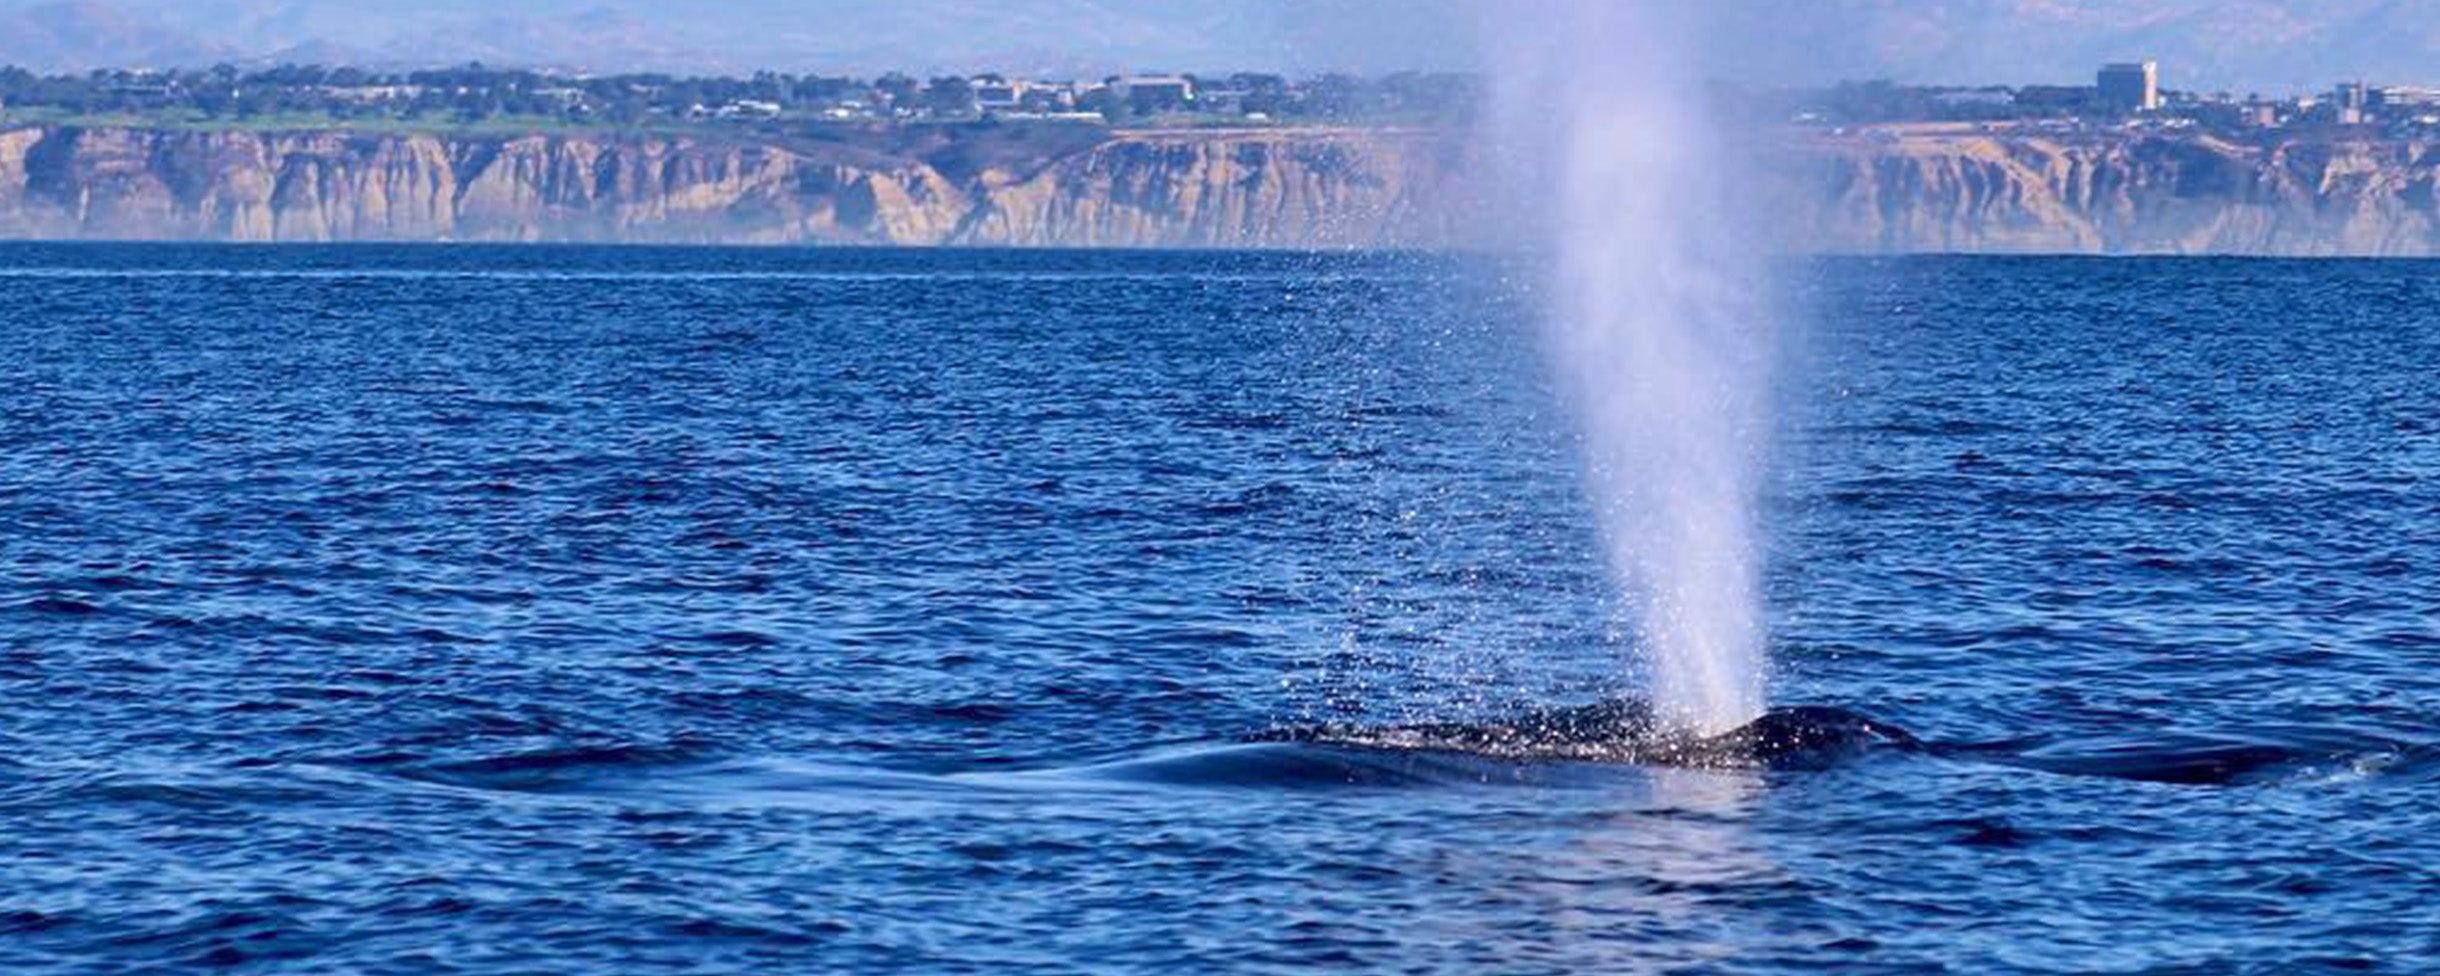 Tours - Everyday California Whale Watching Tours seeing a blow hole from a whale.